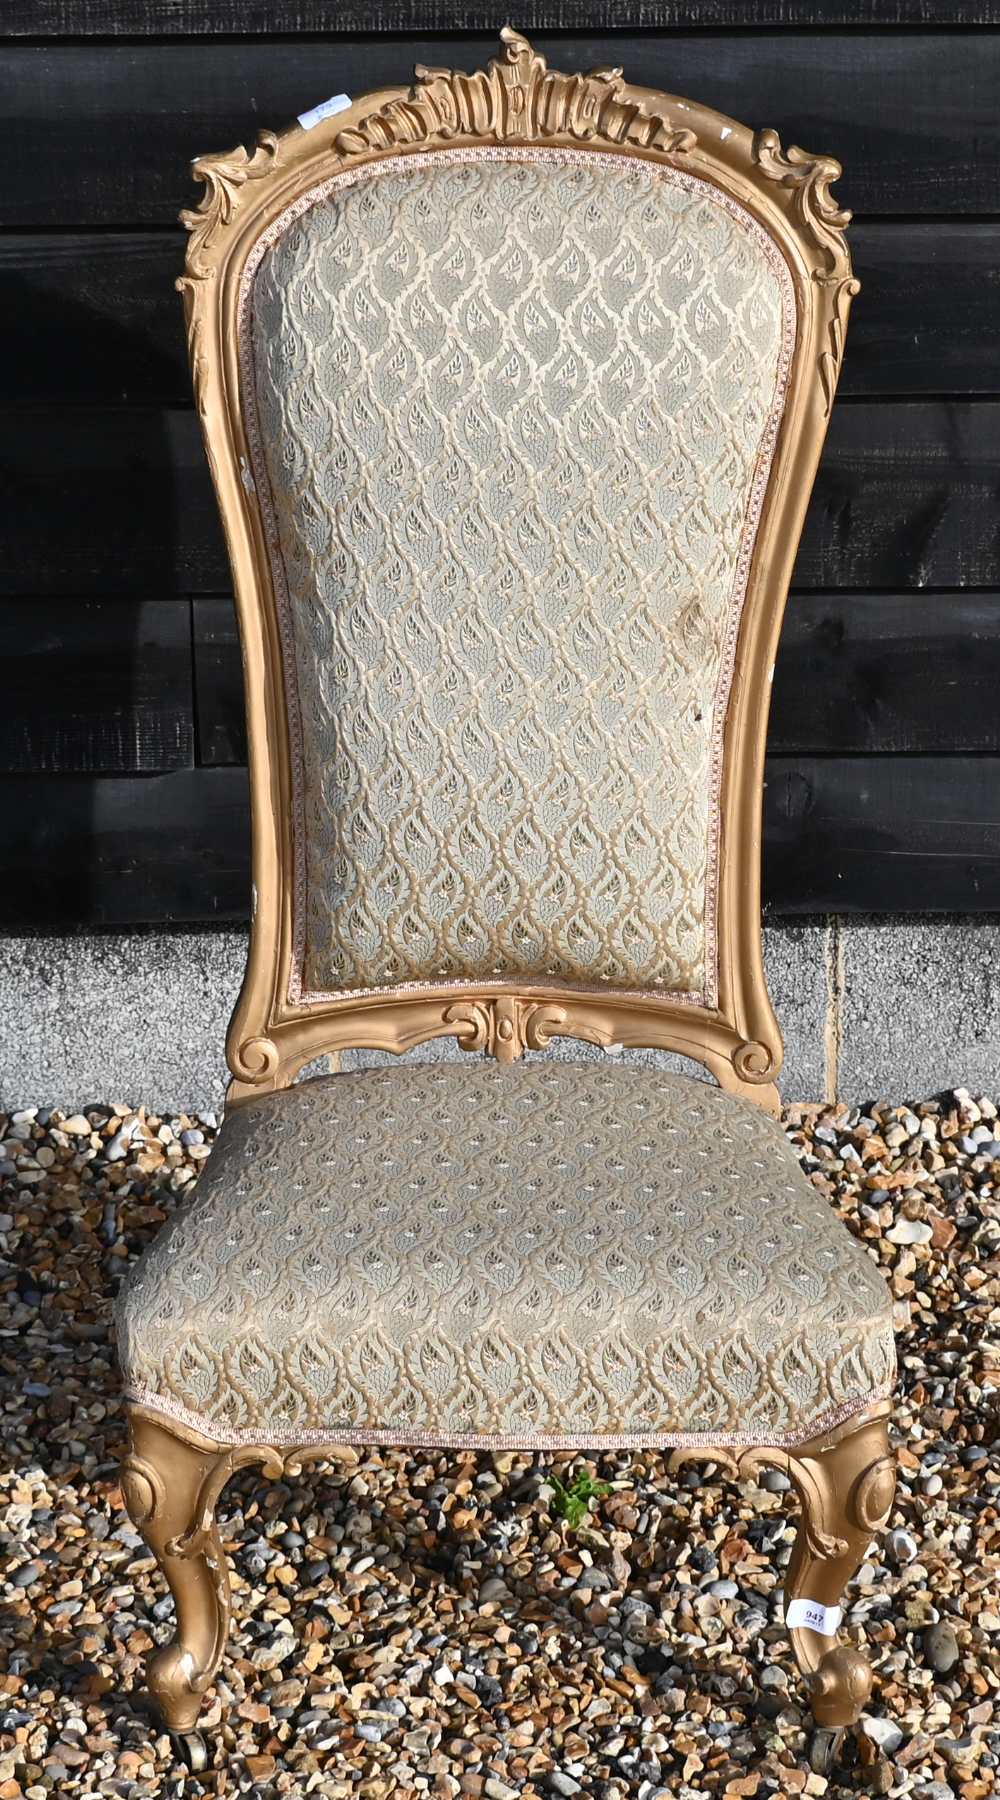 A Continental gilt framed nursing chair with repeating leaf pattern brocade upholstery - Image 2 of 4